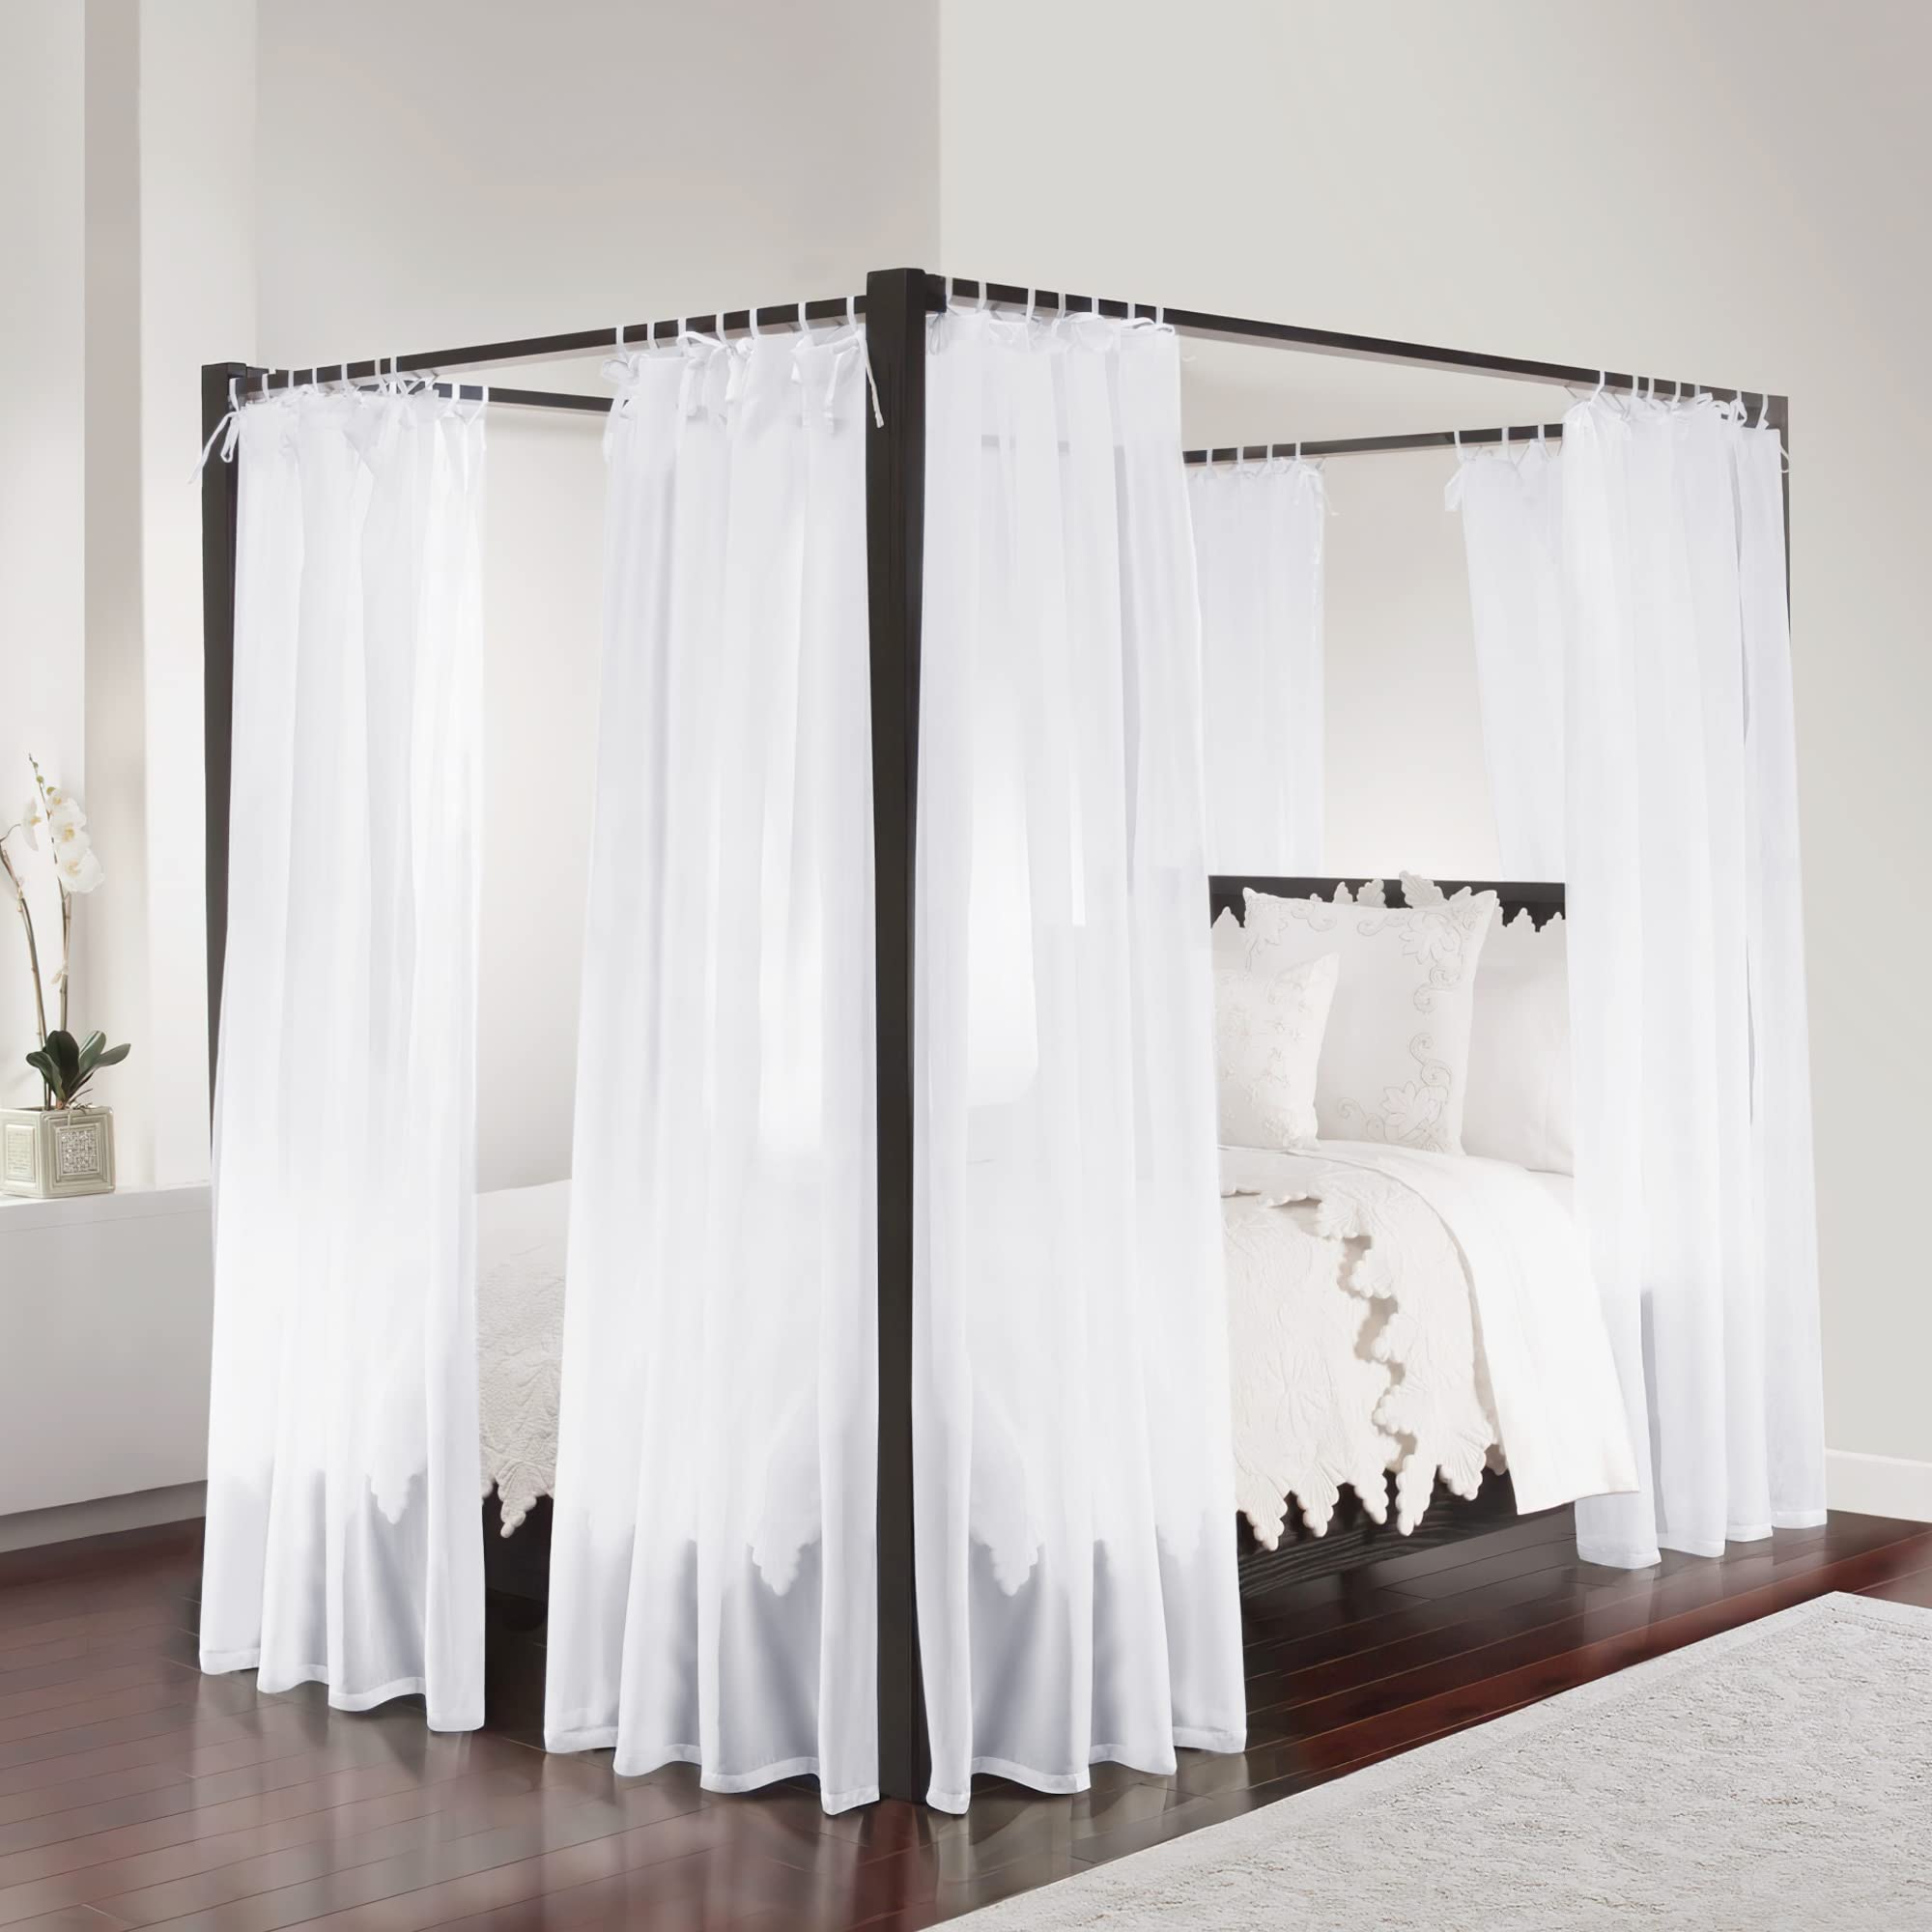 8PCS White Bed Canopy Curtains, Elegant & Chic Soft Voile Sheer Textured Airy & Breathable Bed Canopy Drapes with Top Ties & Tie Backs